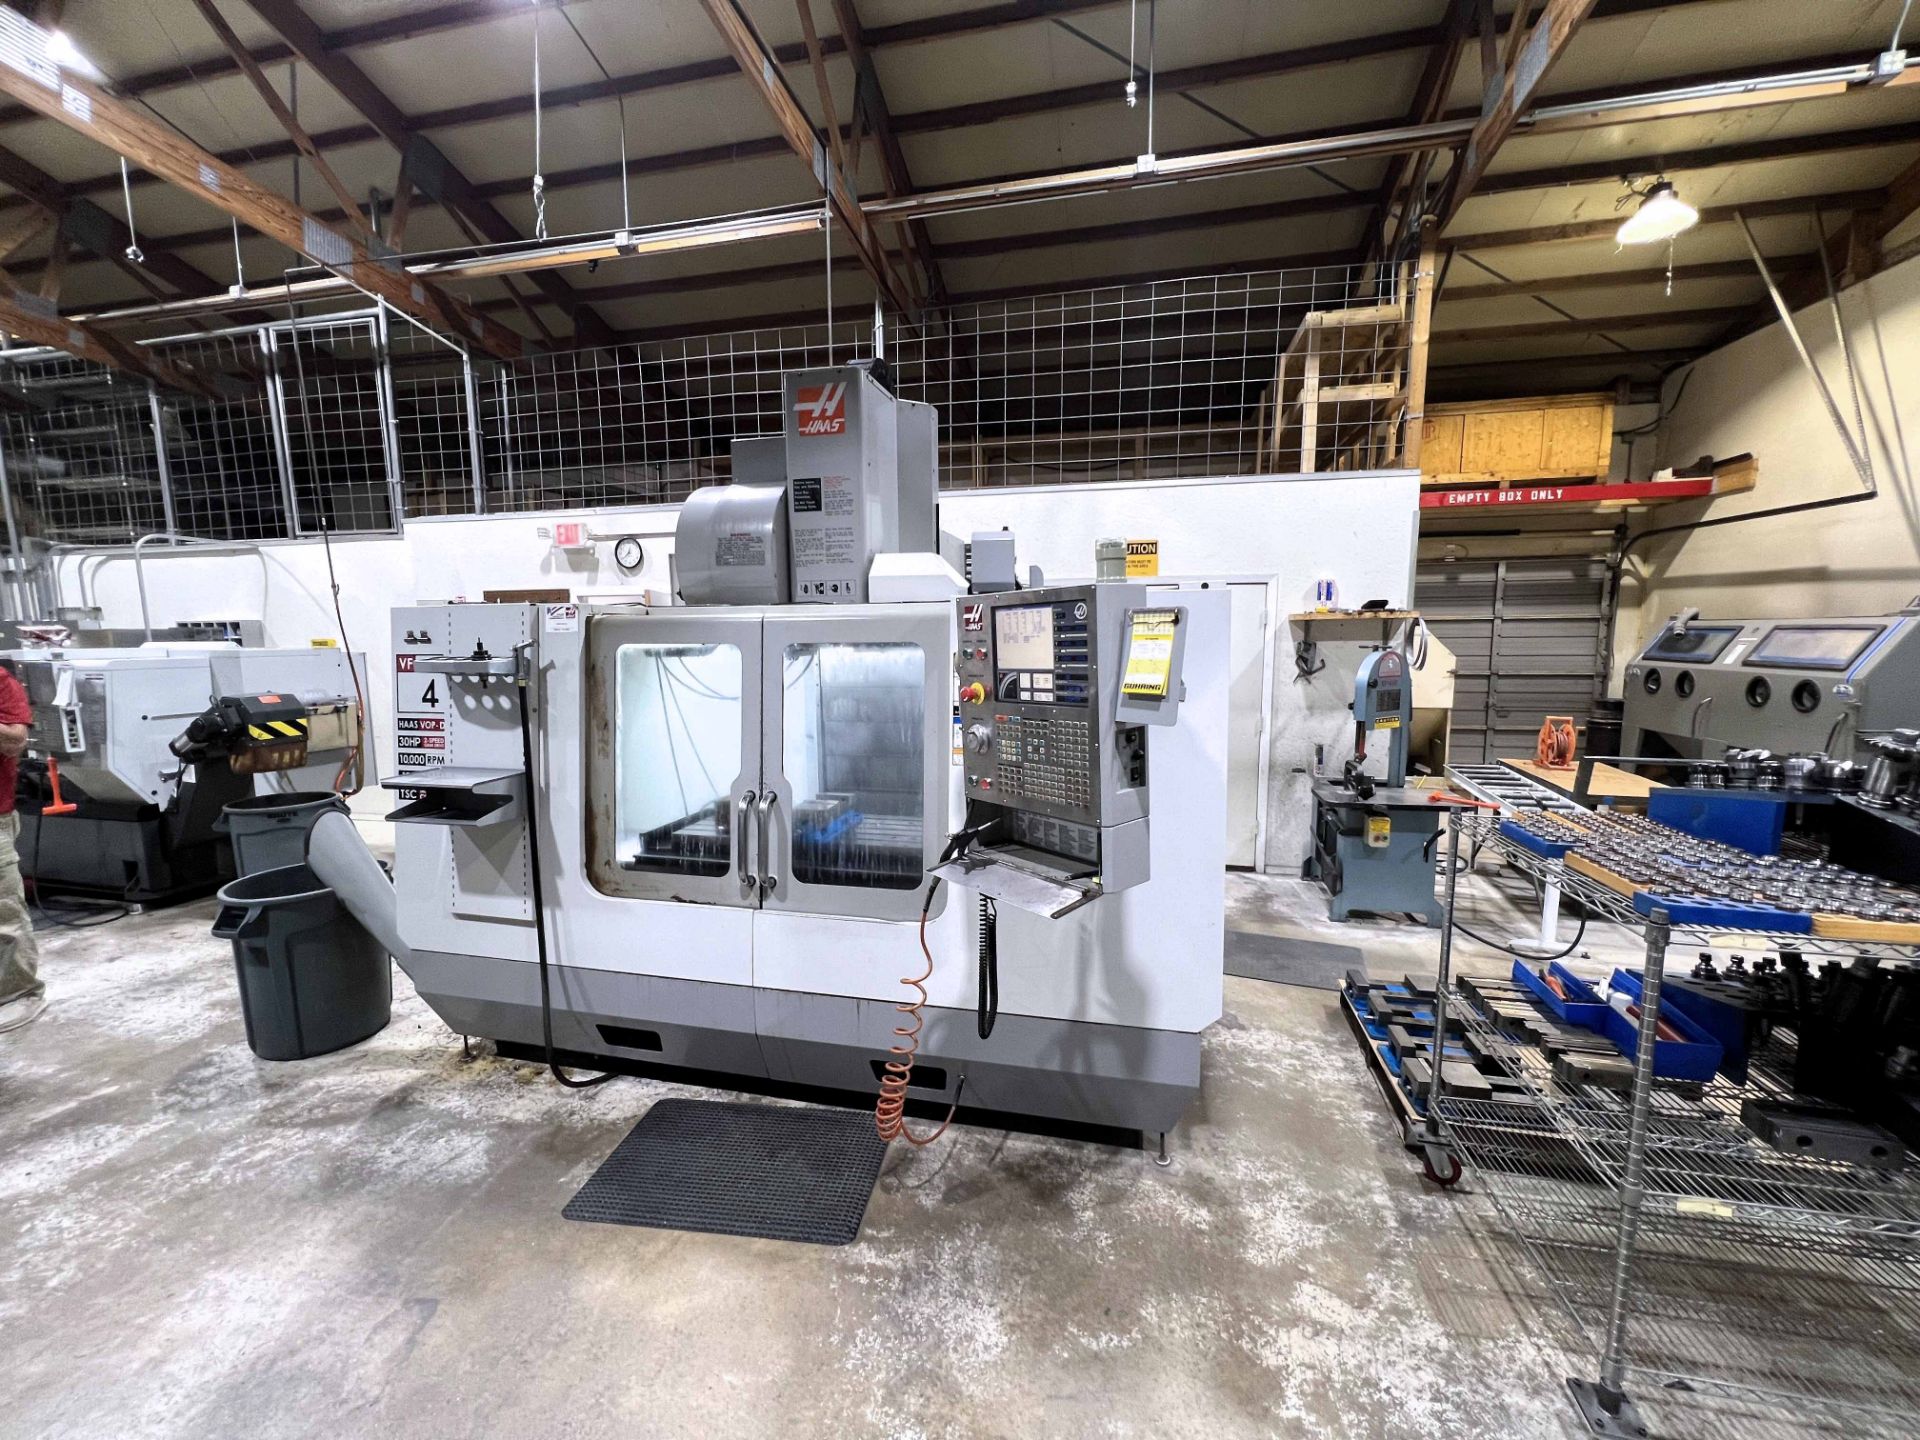 Haas VF-4B Vertical Machining Center (2007) - Image 7 of 10